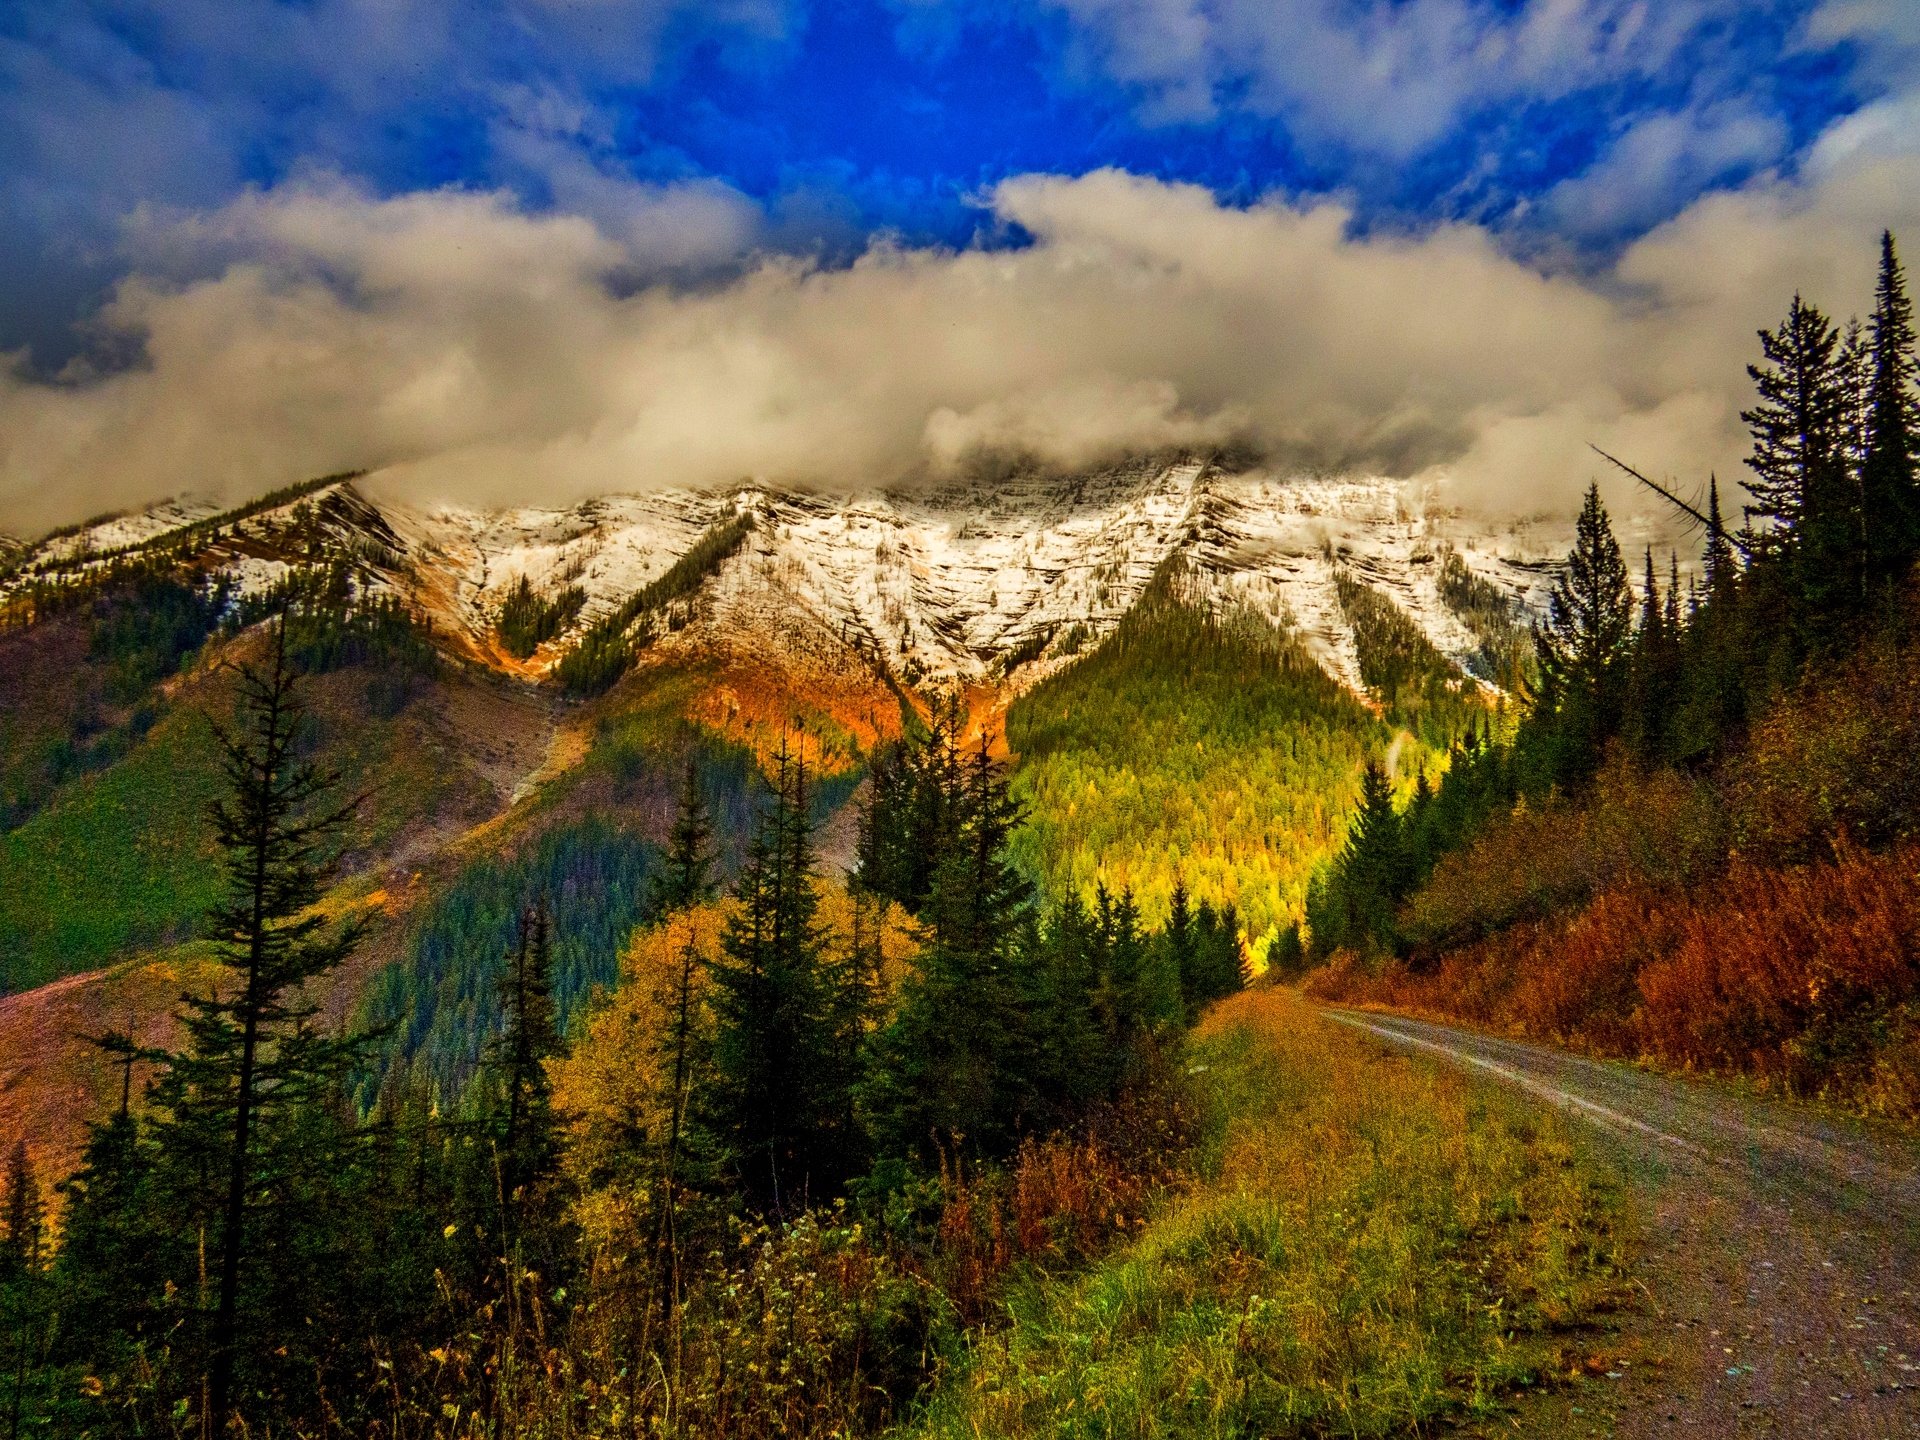 leaves, Autumn, Splendor, Clouds, Snow, Fall, Nature, Trees, Mountains, Colors, Sky, Road, Autumn, Park, Wal, Forest, Path, Colorful Wallpaper